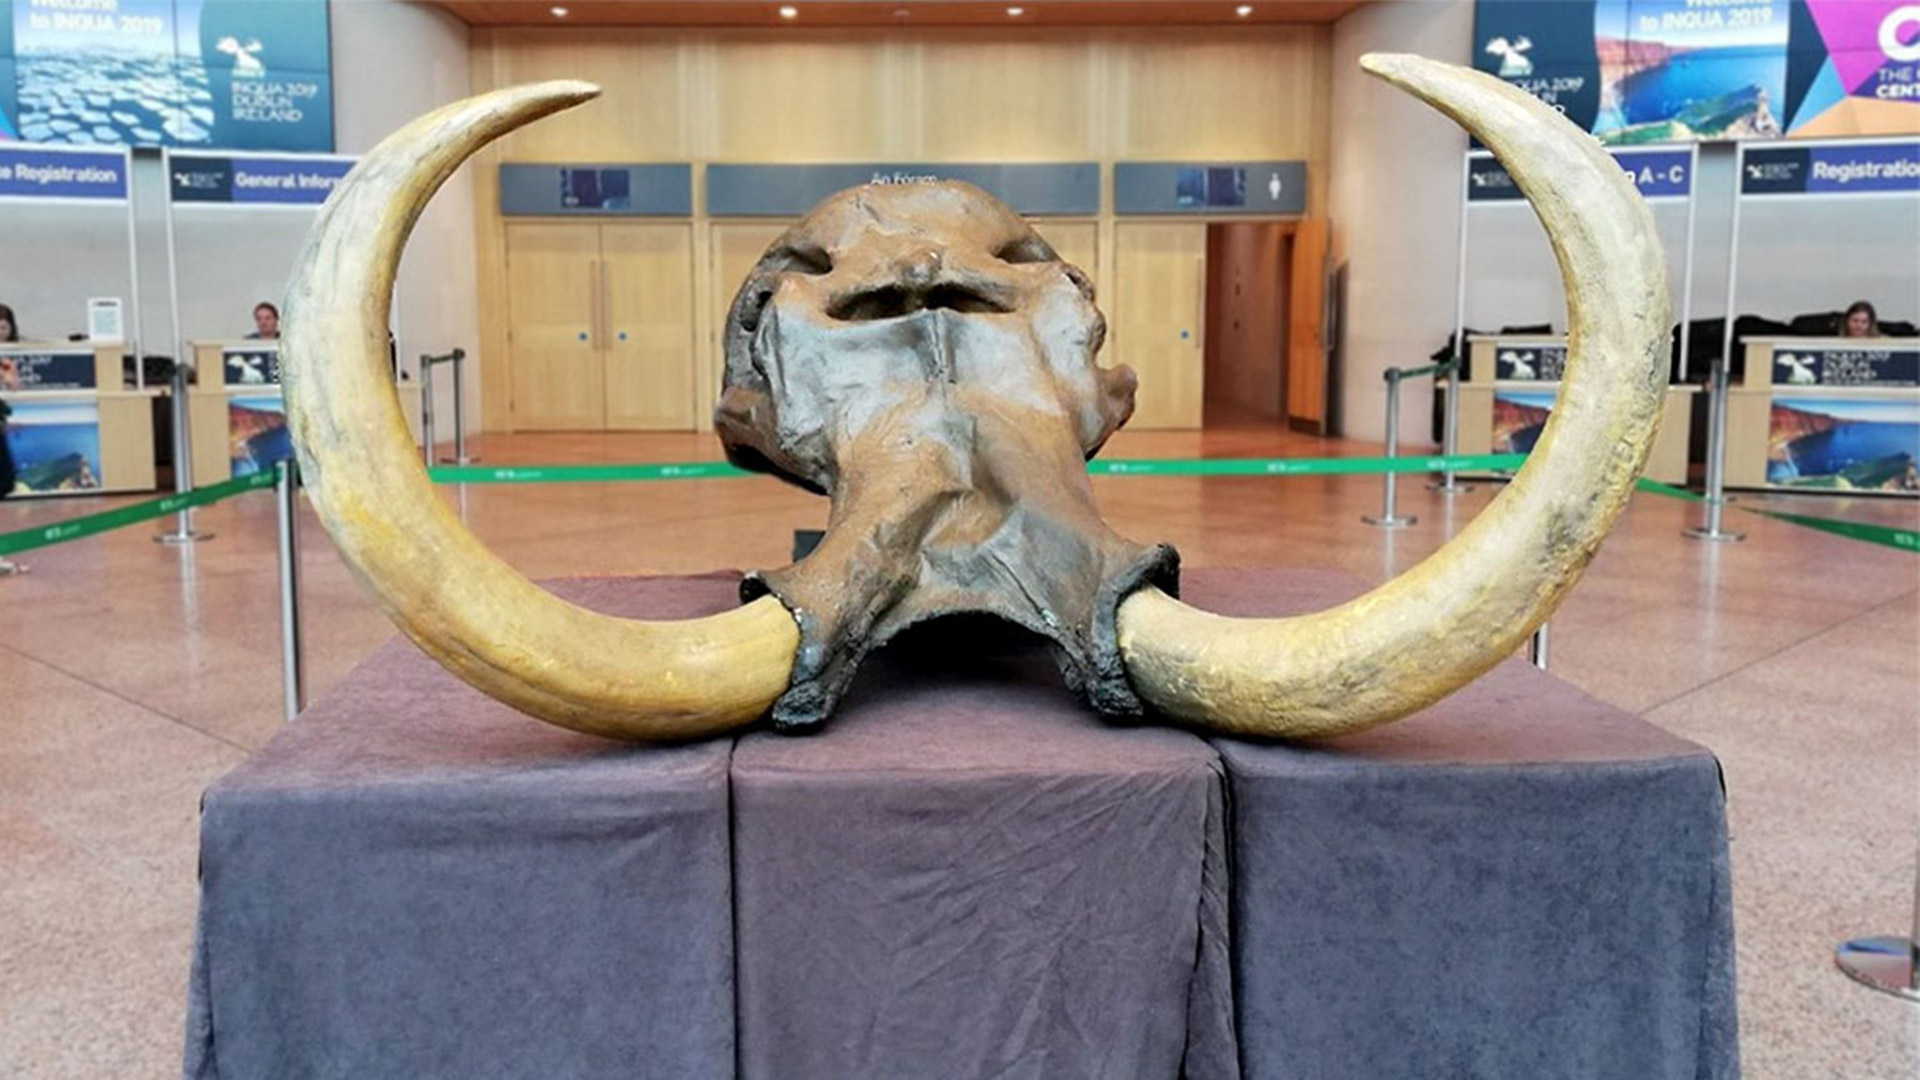 A replica of the skull of a woolly mammoth, excavated in 1985 at Gerhartsreiter Graben, Siegsdorf, Bavaria, Germany, dated to approximately 48,000 years BP.